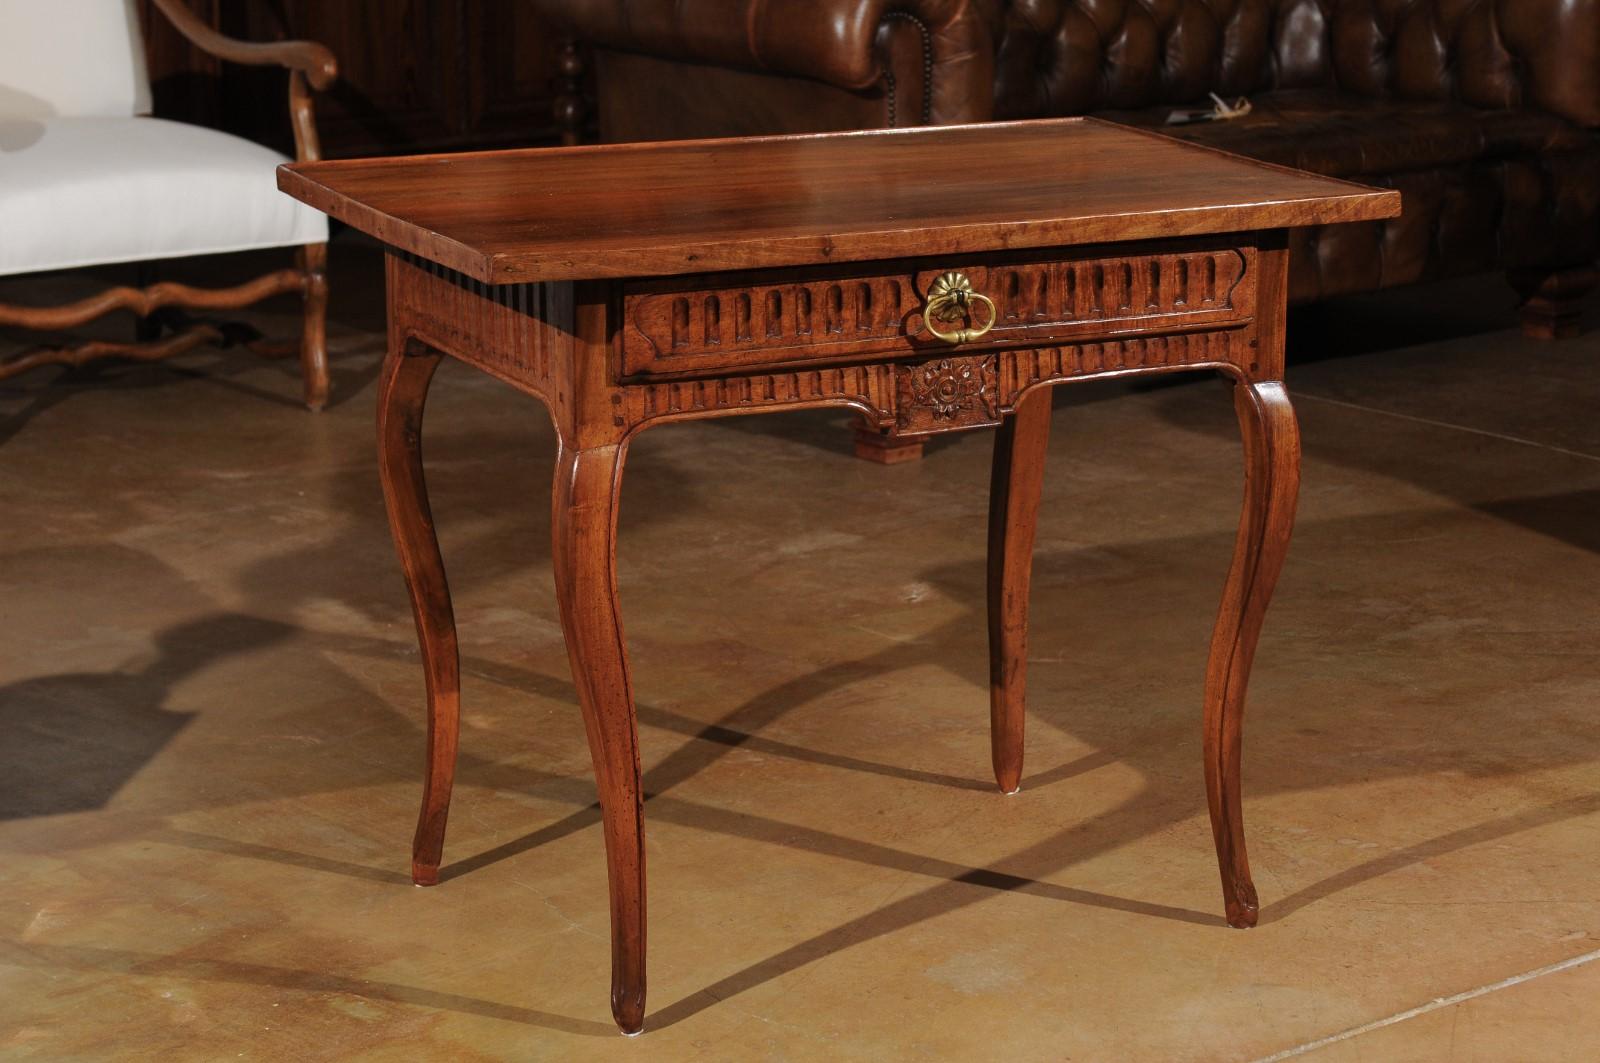 A southern French transitional walnut side table from the third quarter of the 18th century, with carved apron and cabriole legs. Born at the end of the reign of King Louis XV at a time when the Rococo style was transitioning to calmer, more classic